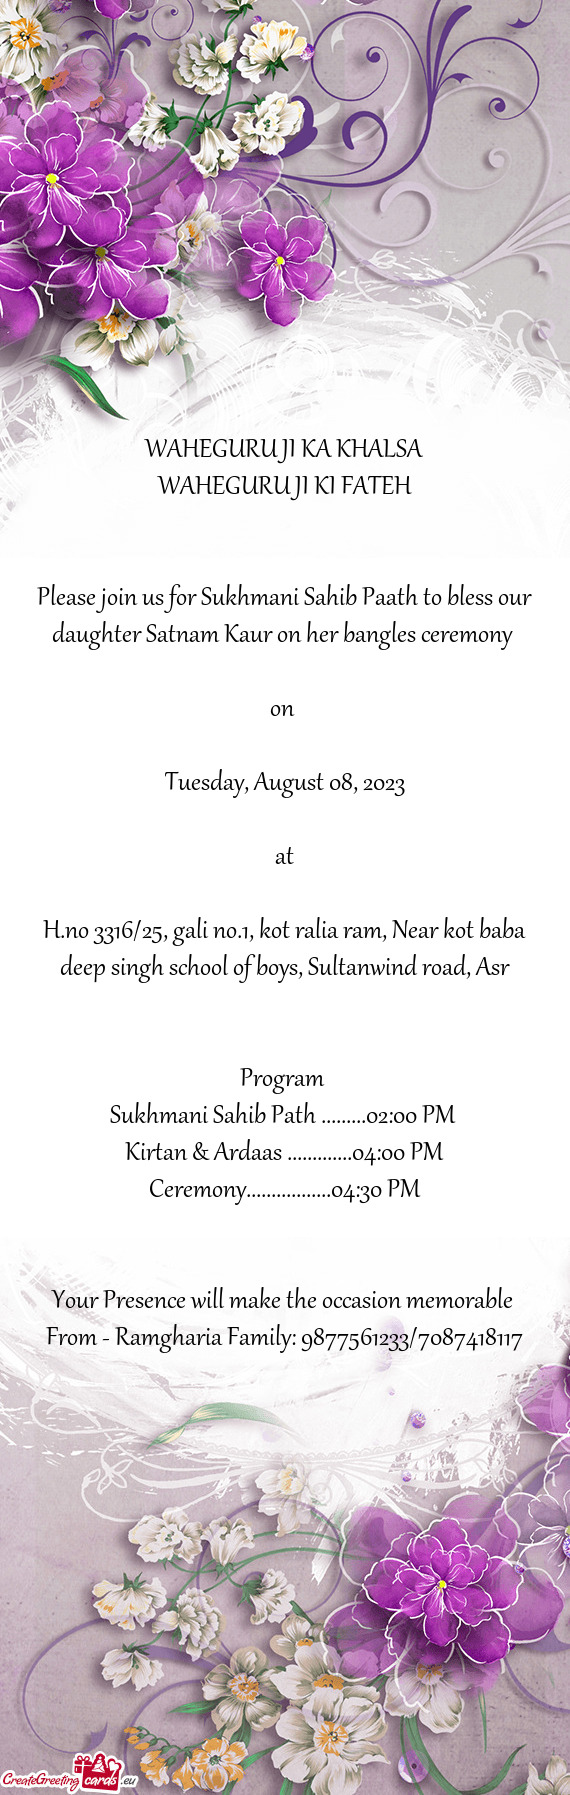 Please join us for Sukhmani Sahib Paath to bless our daughter Satnam Kaur on her bangles ceremony